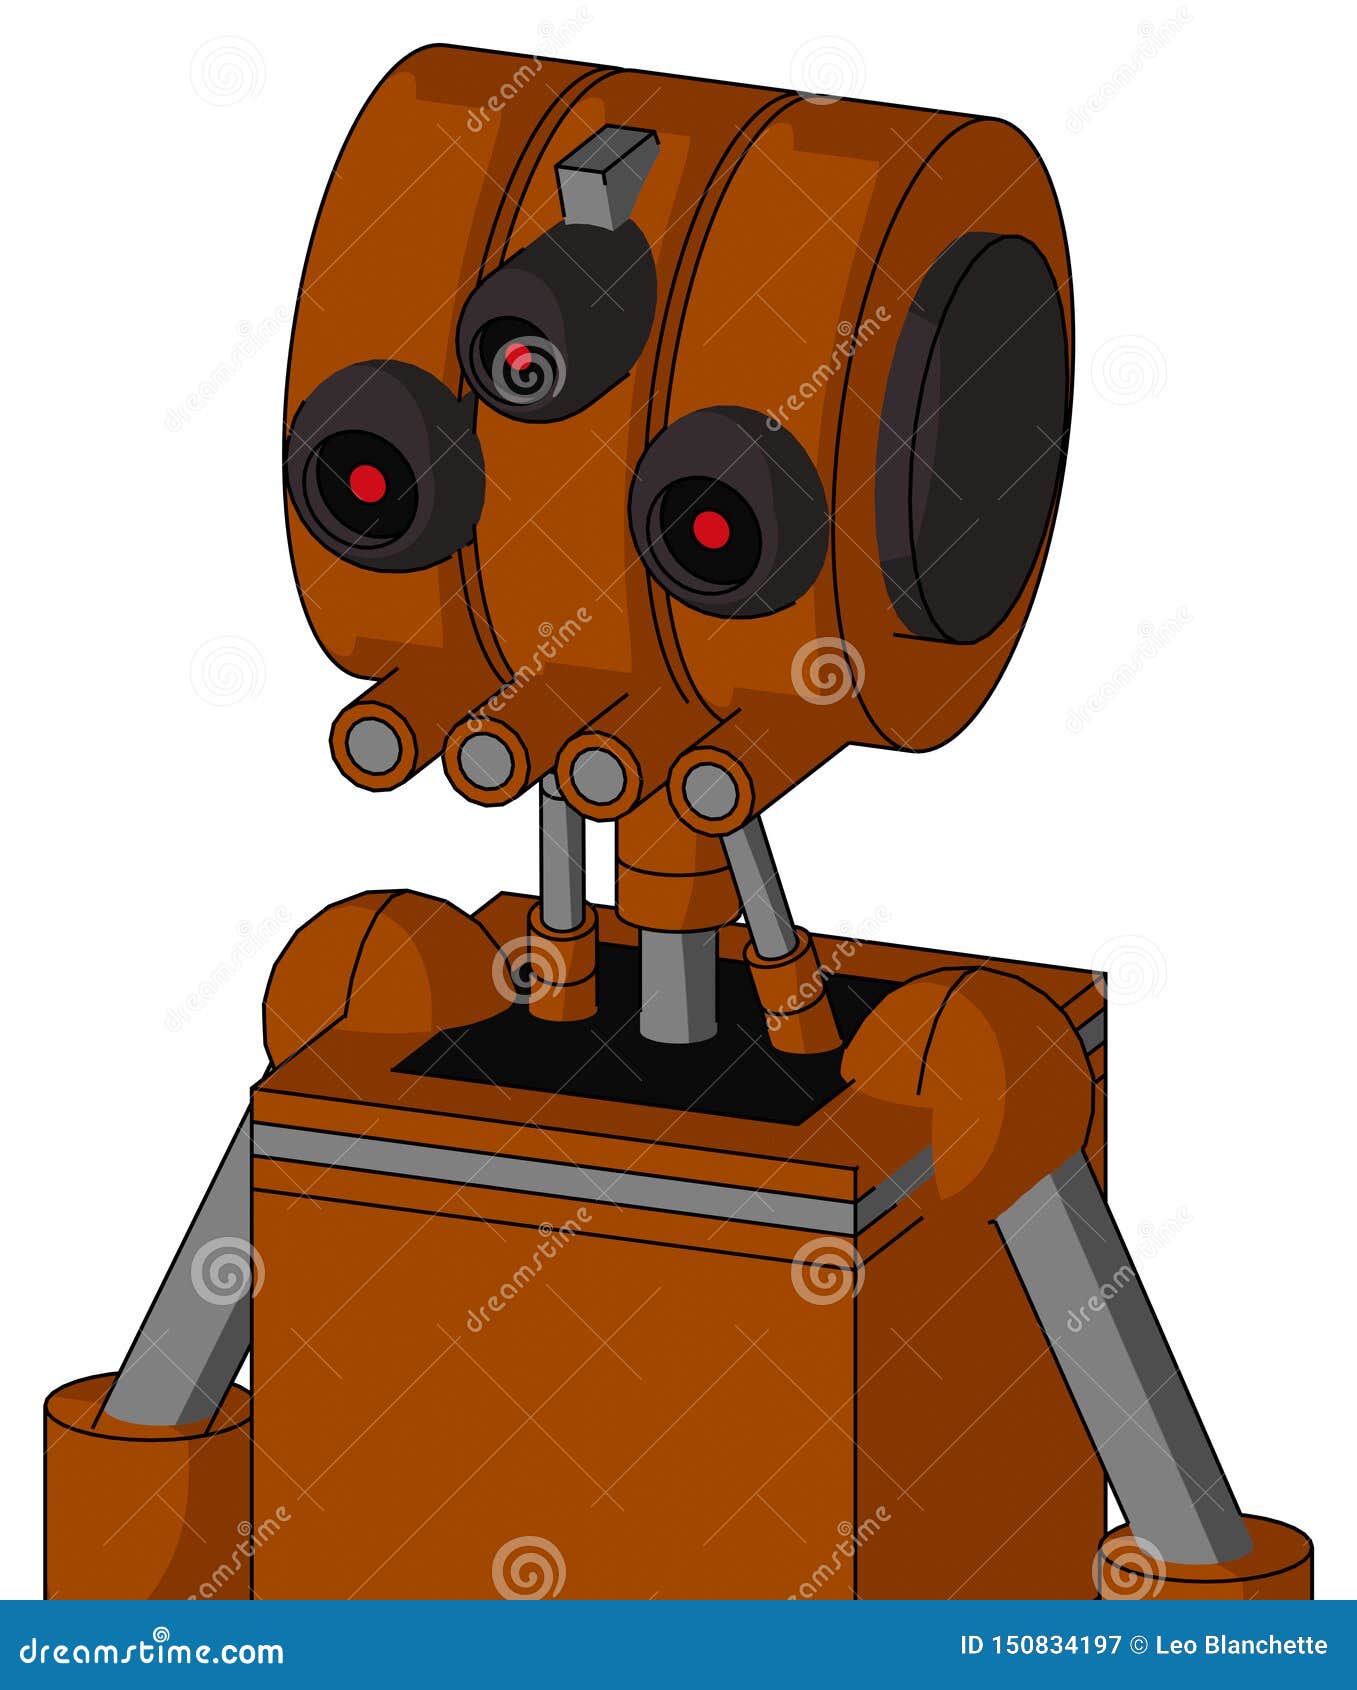 redish-orange mech with multi-toroid head and pipes mouth and three-eyed